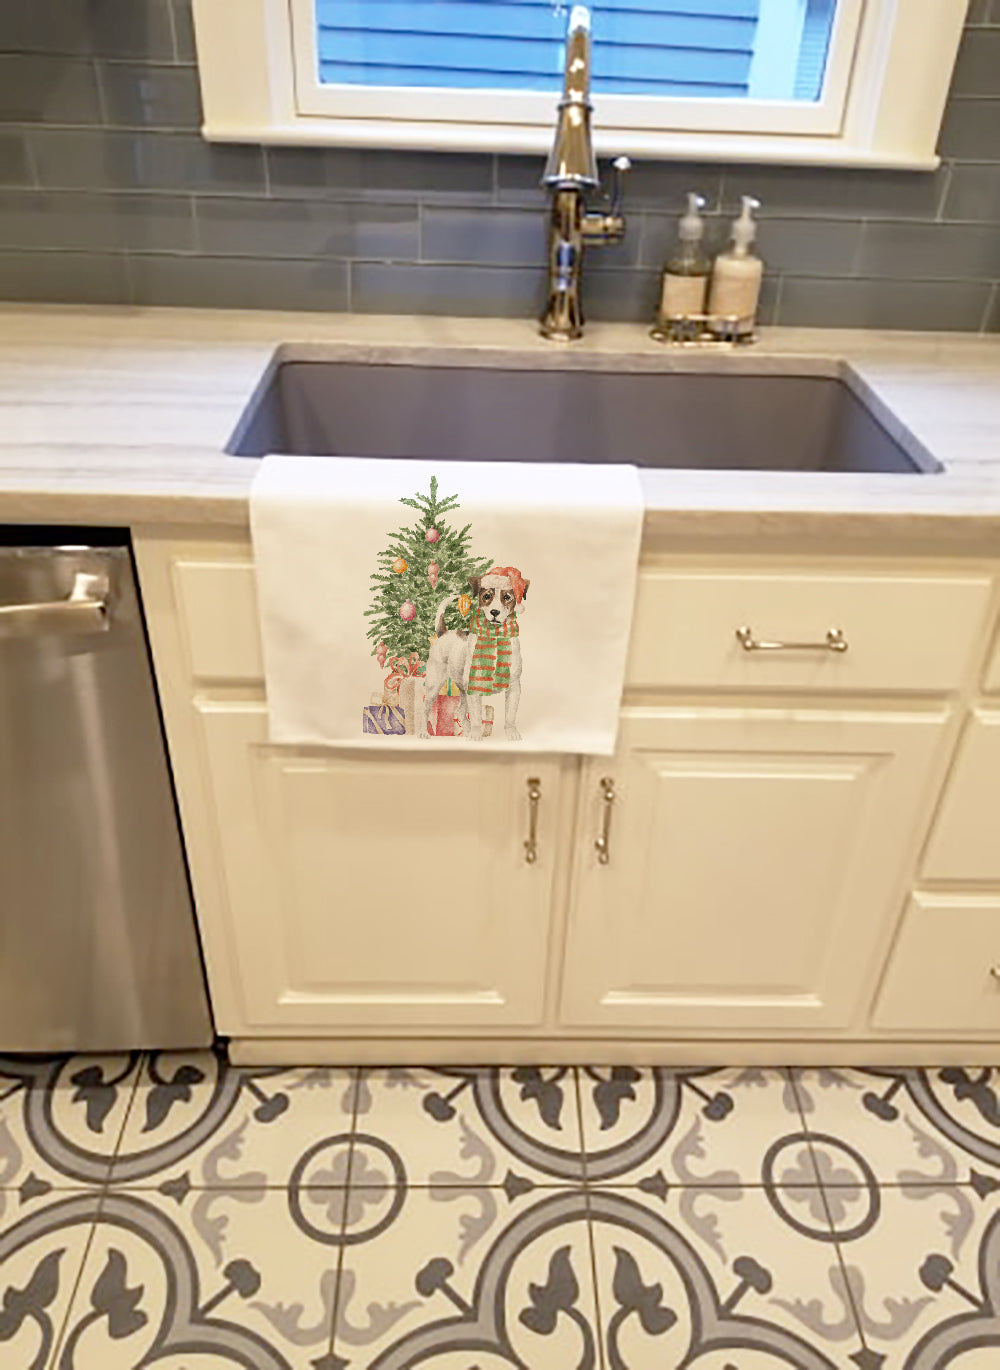 Buy this Jack Russell Terrier Smooth Christmas Presents and Tree White Kitchen Towel Set of 2